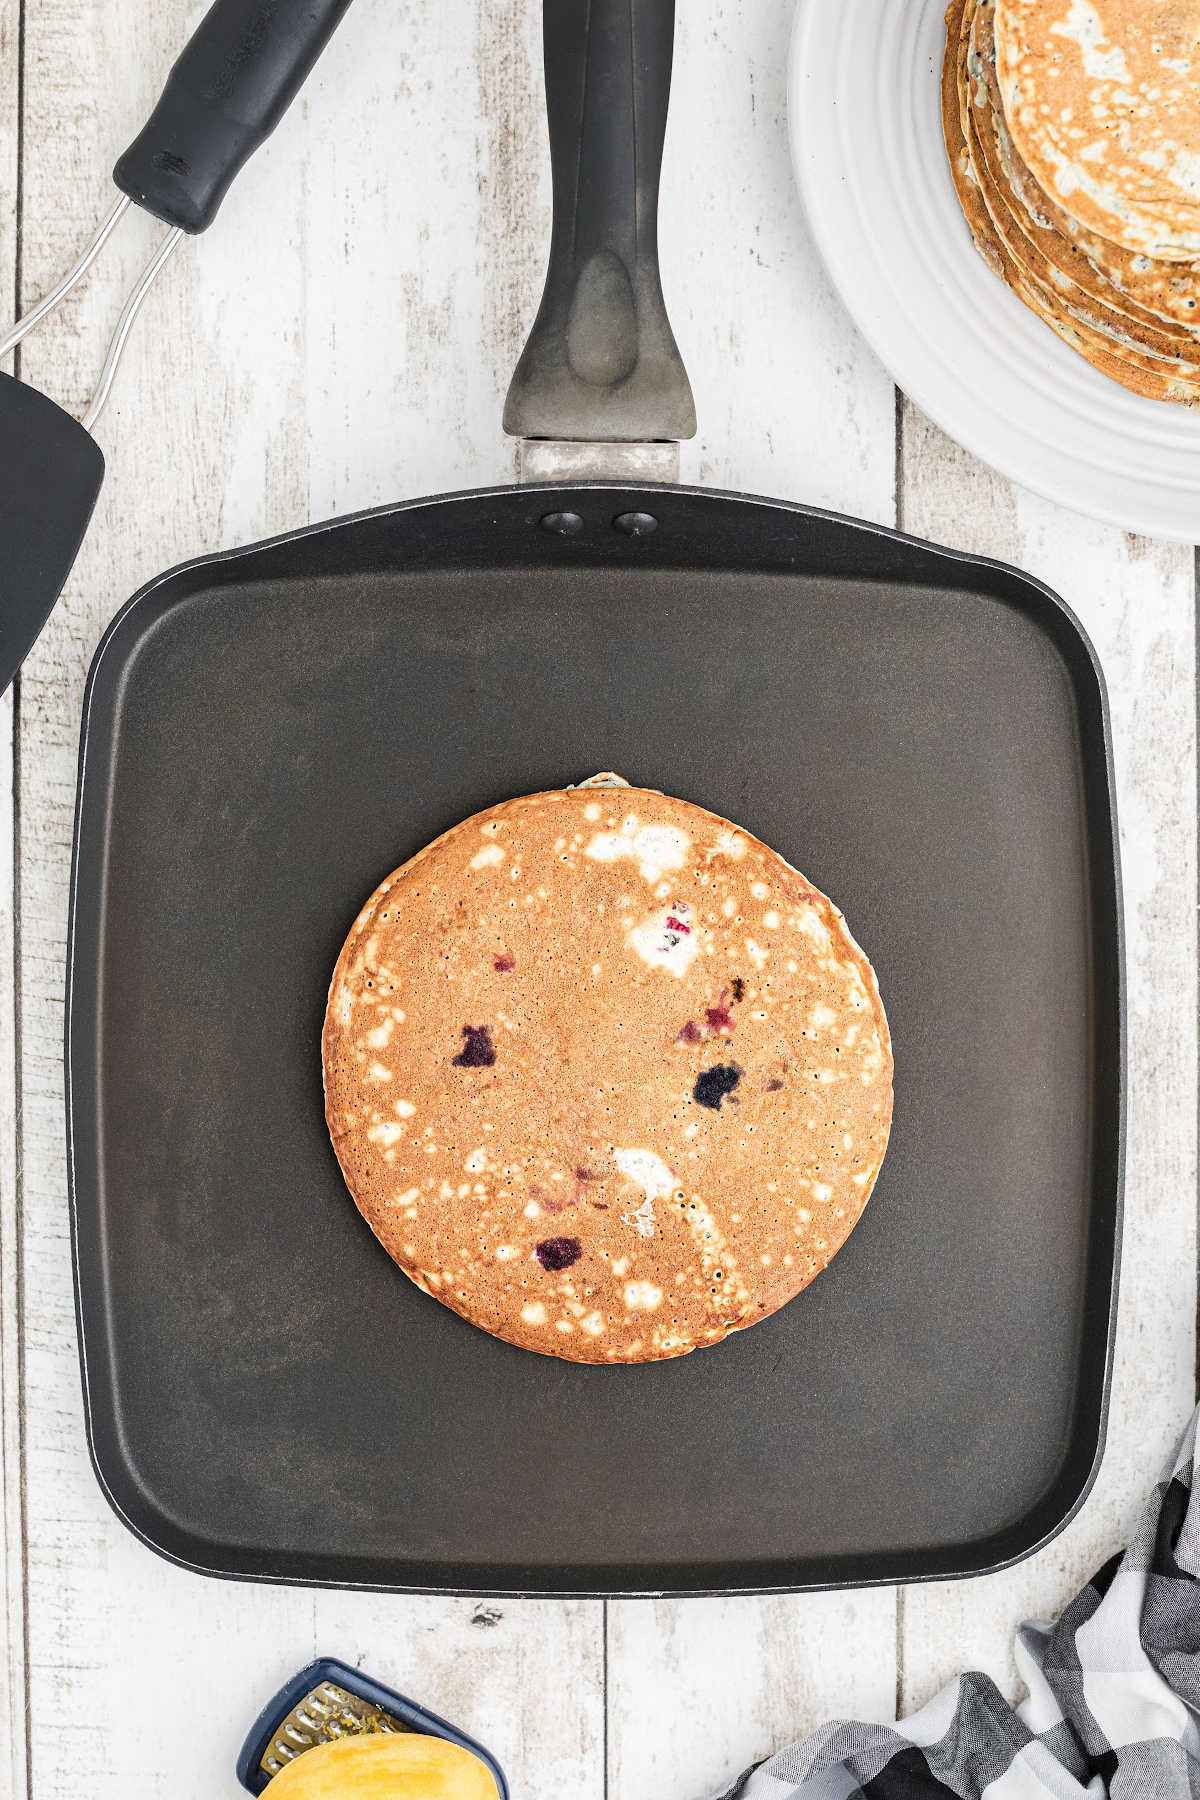 A finished pancake on a griddle.